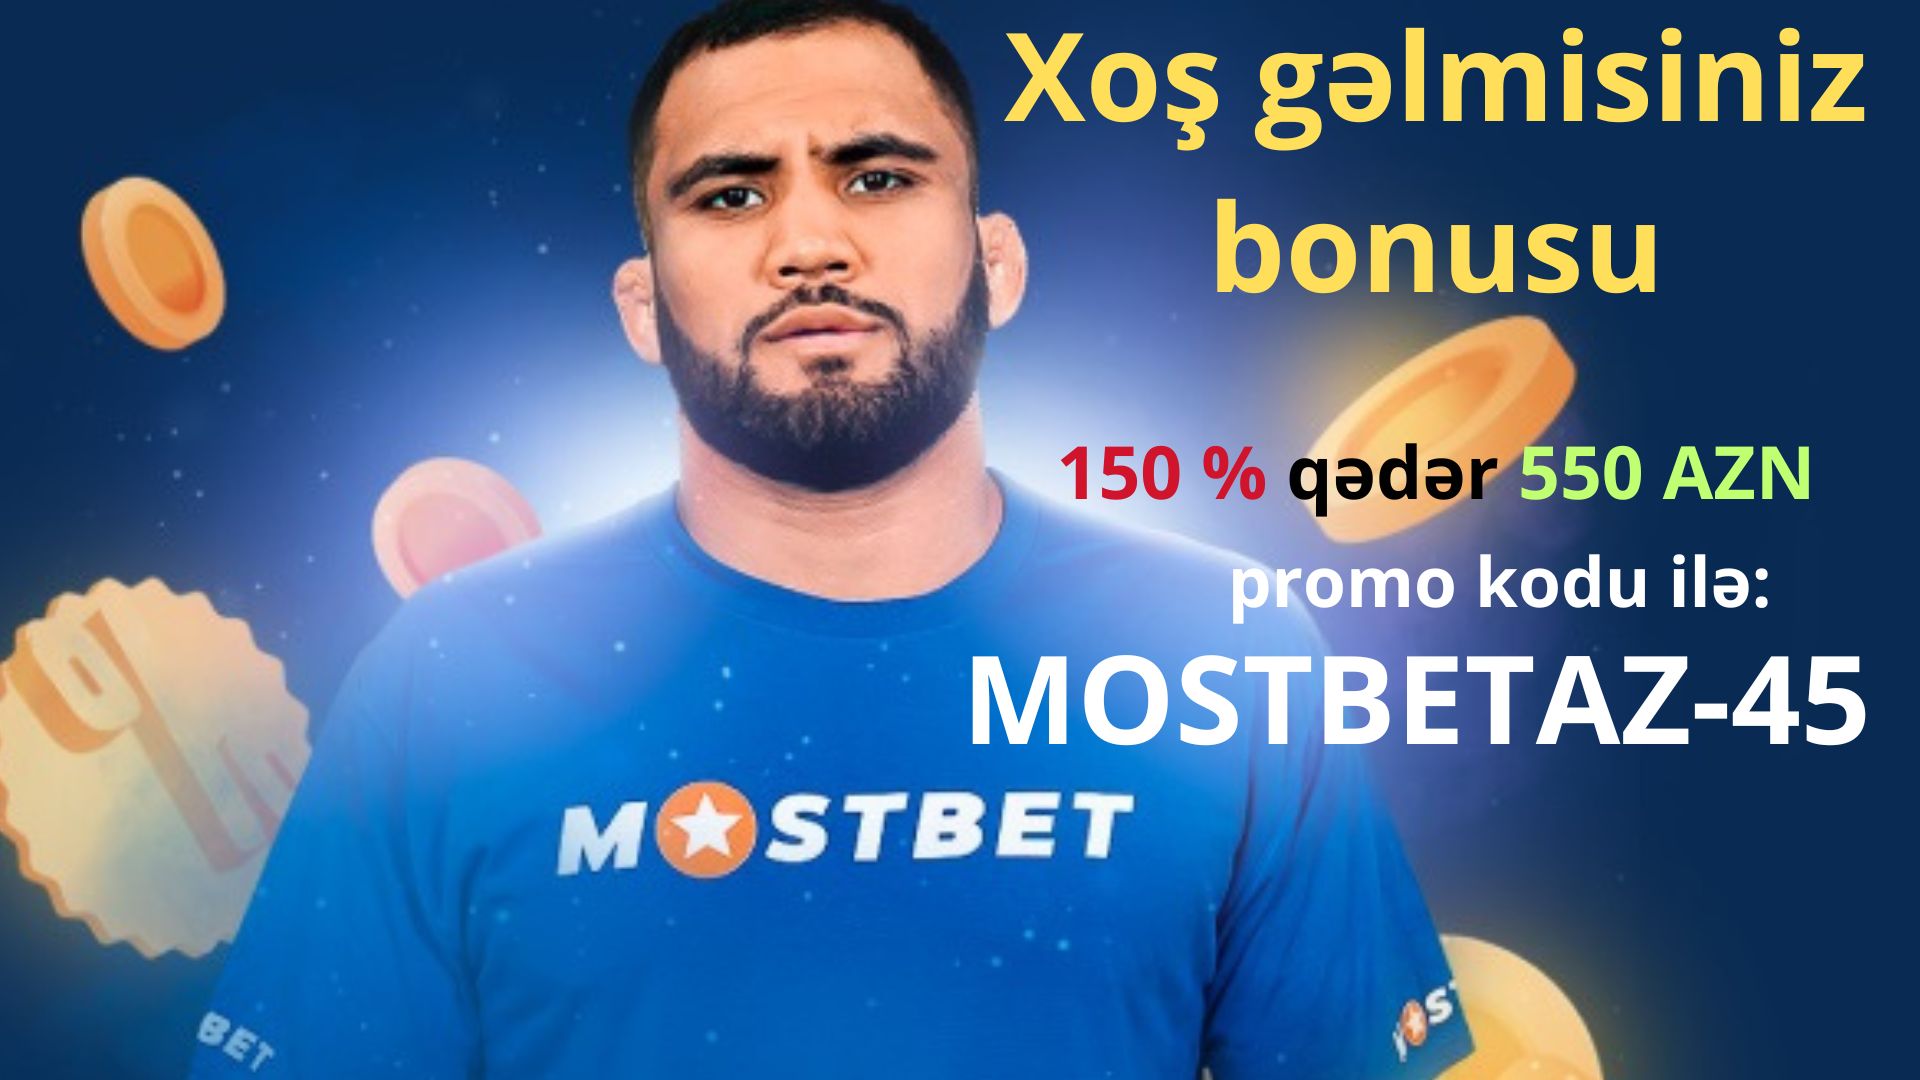 Sexy People Do Mostbet-AZ90 Bookmaker and Casino in Azerbaijan :)